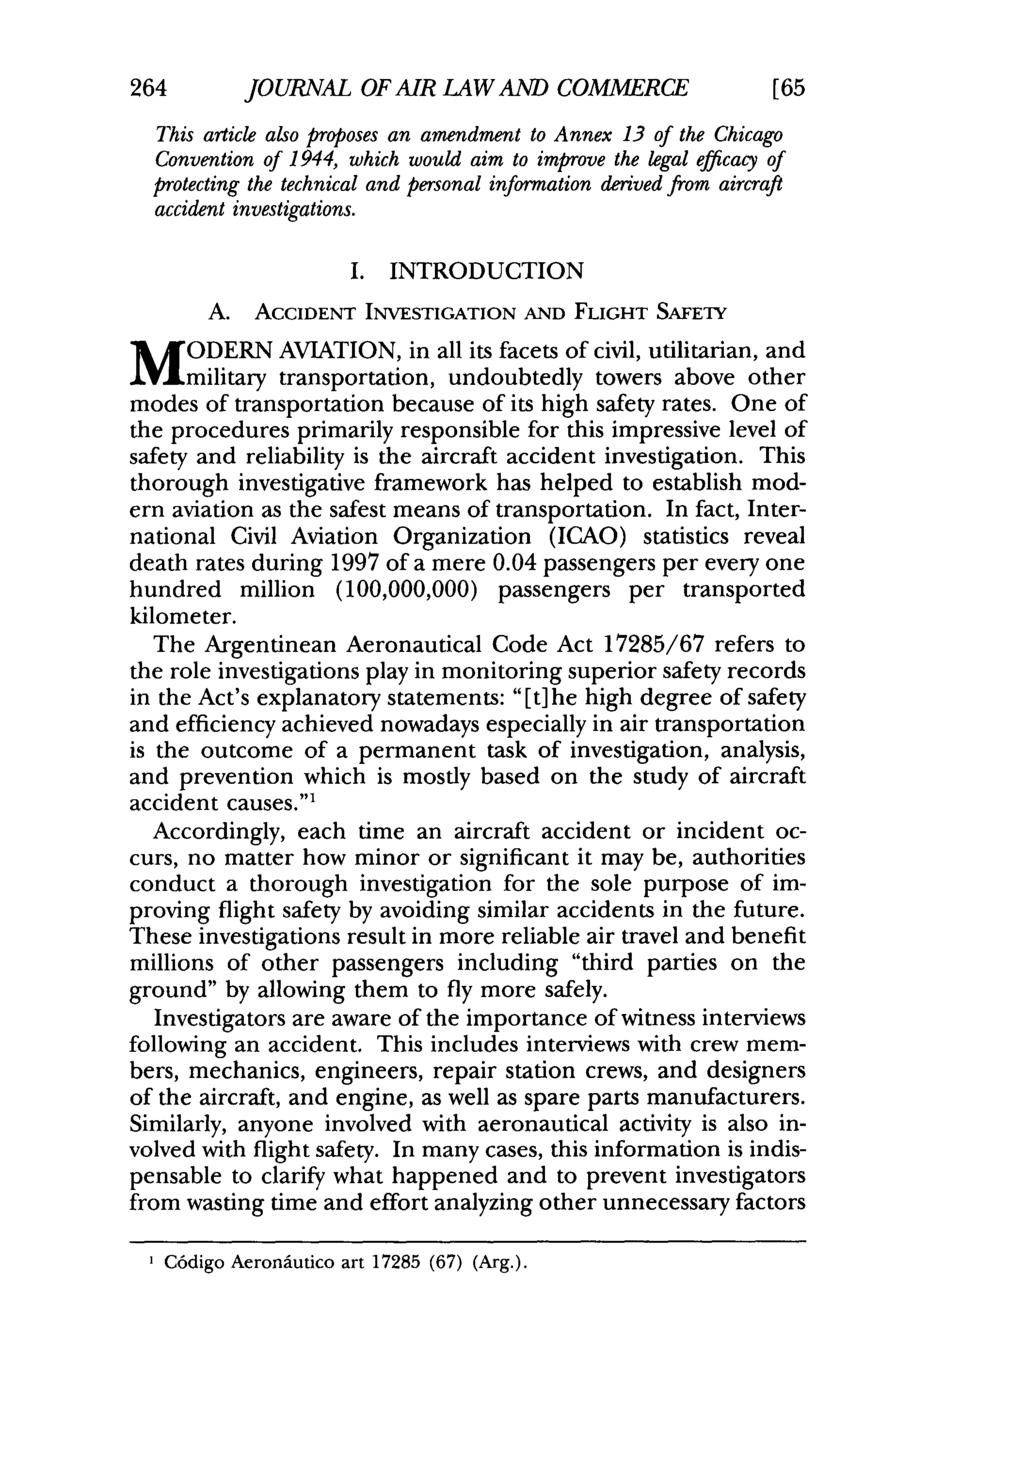 264 JOURNAL OF AIR LAW AMD COMMERCE This article also proposes an amendment to Annex 13 of the Chicago Convention of 1944, which would aim to improve the legal efficacy of protecting the technical